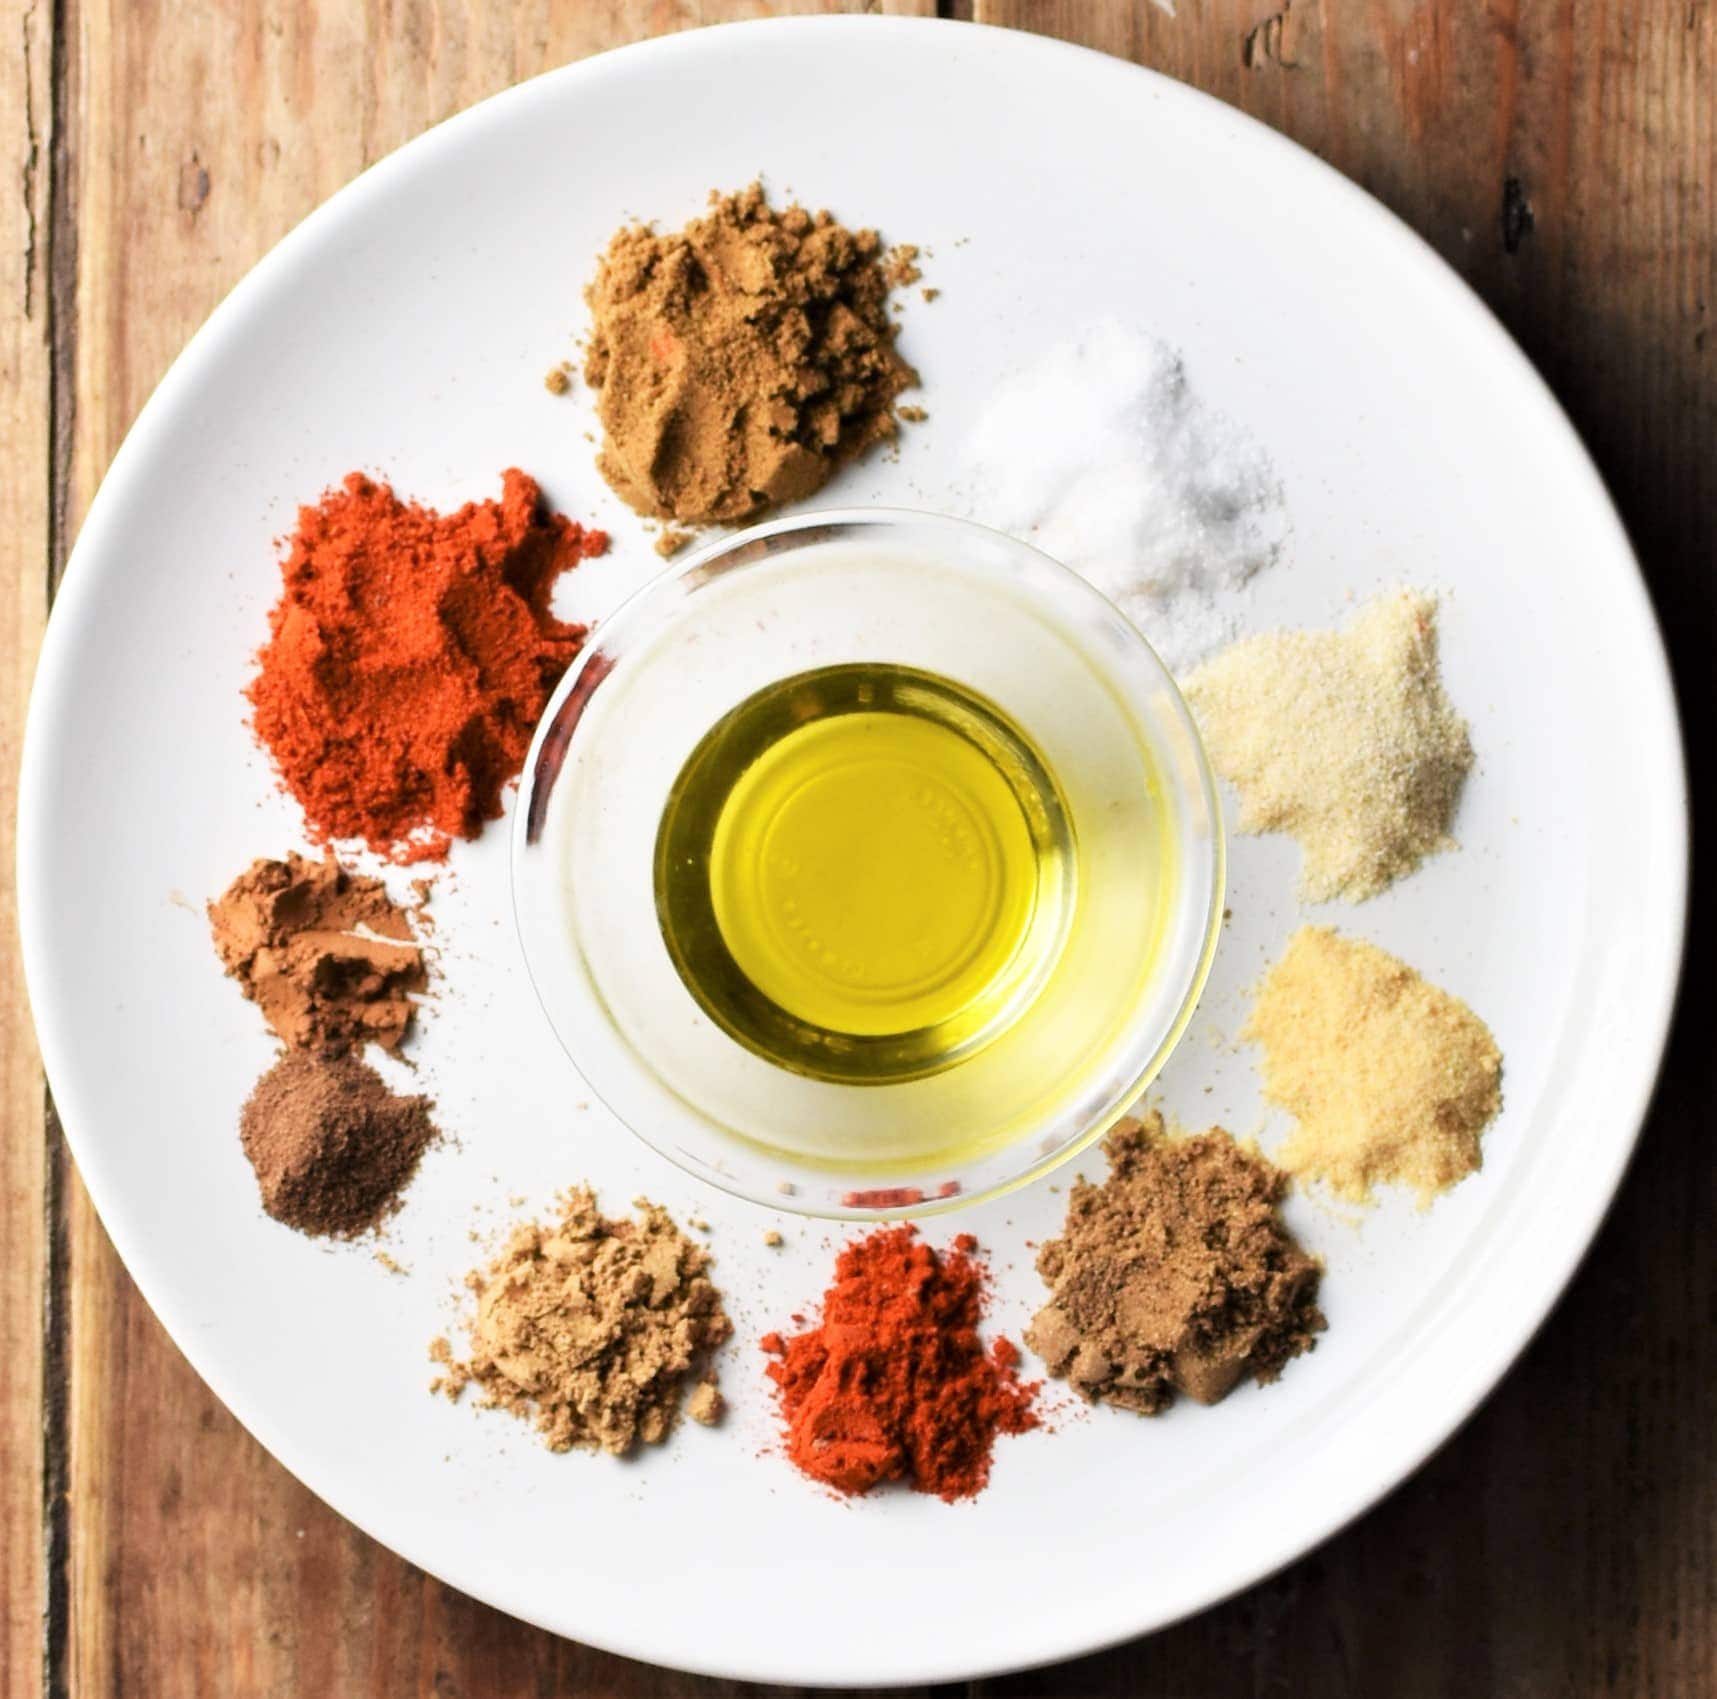 Spices and oil on top of plate.